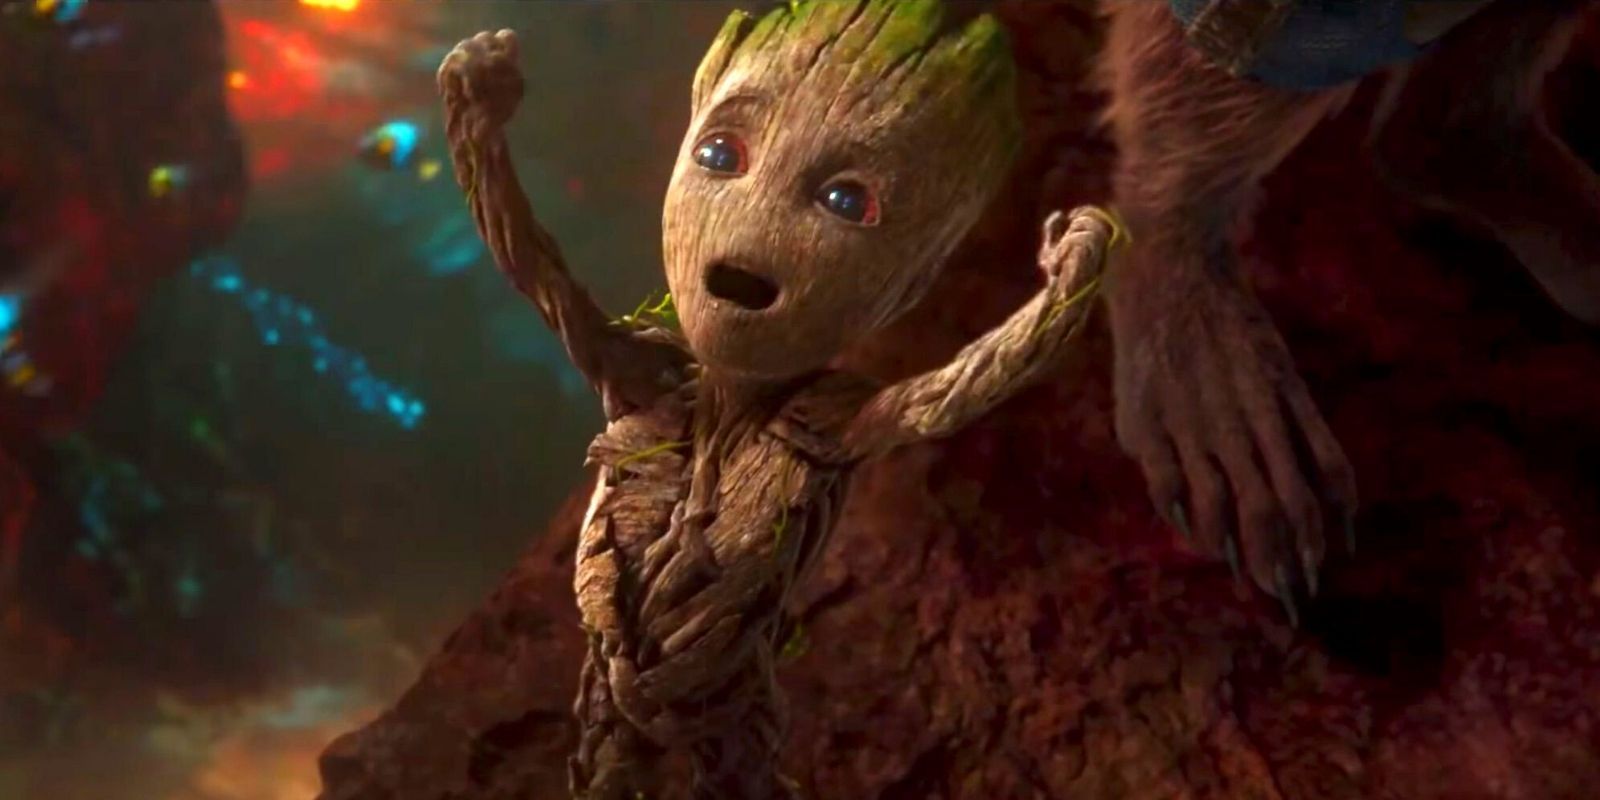 Baby Groot raises his arms in Guardians of the Galaxy Vol. 2